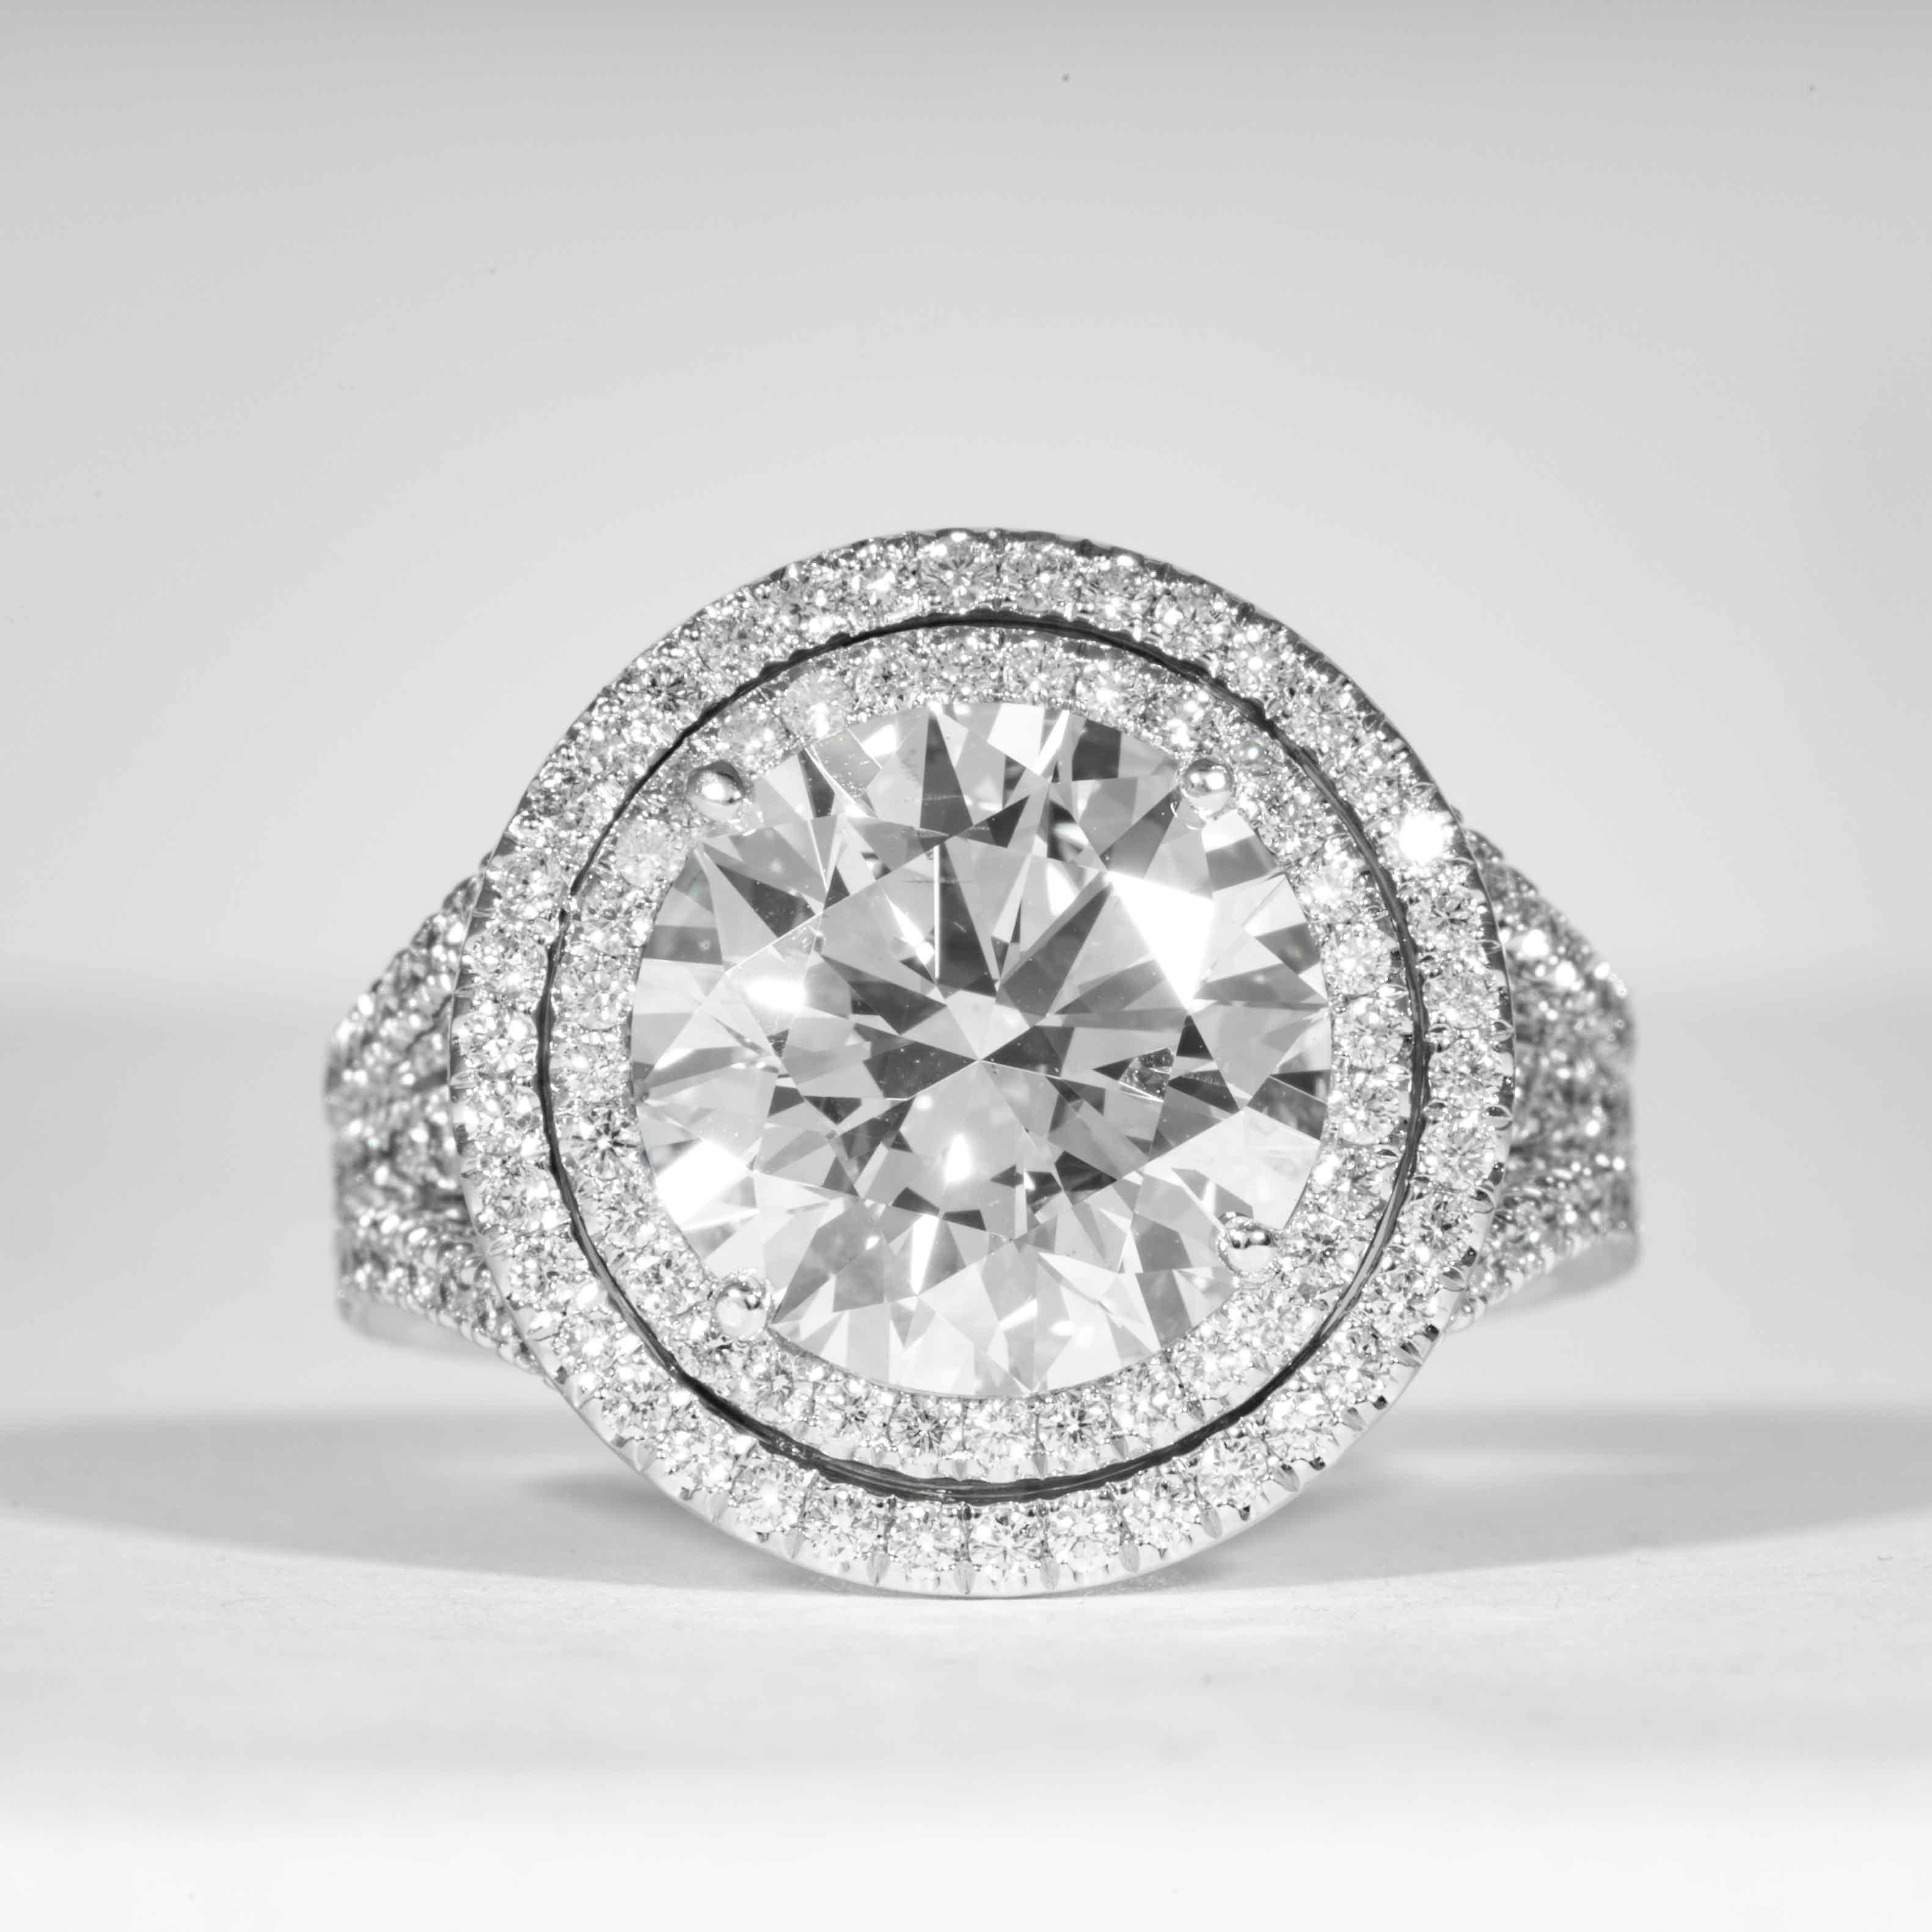 This stunning diamond ring is offered by Shreve, Crump & Low.  This 5.01 carat GIA Certified H SI1 round brilliant cut diamond measuring 10.98 - 11.04 x 6.74 mm is custom set in a handcrafted De Beers platinum double halo ring. The 5.01 carat round